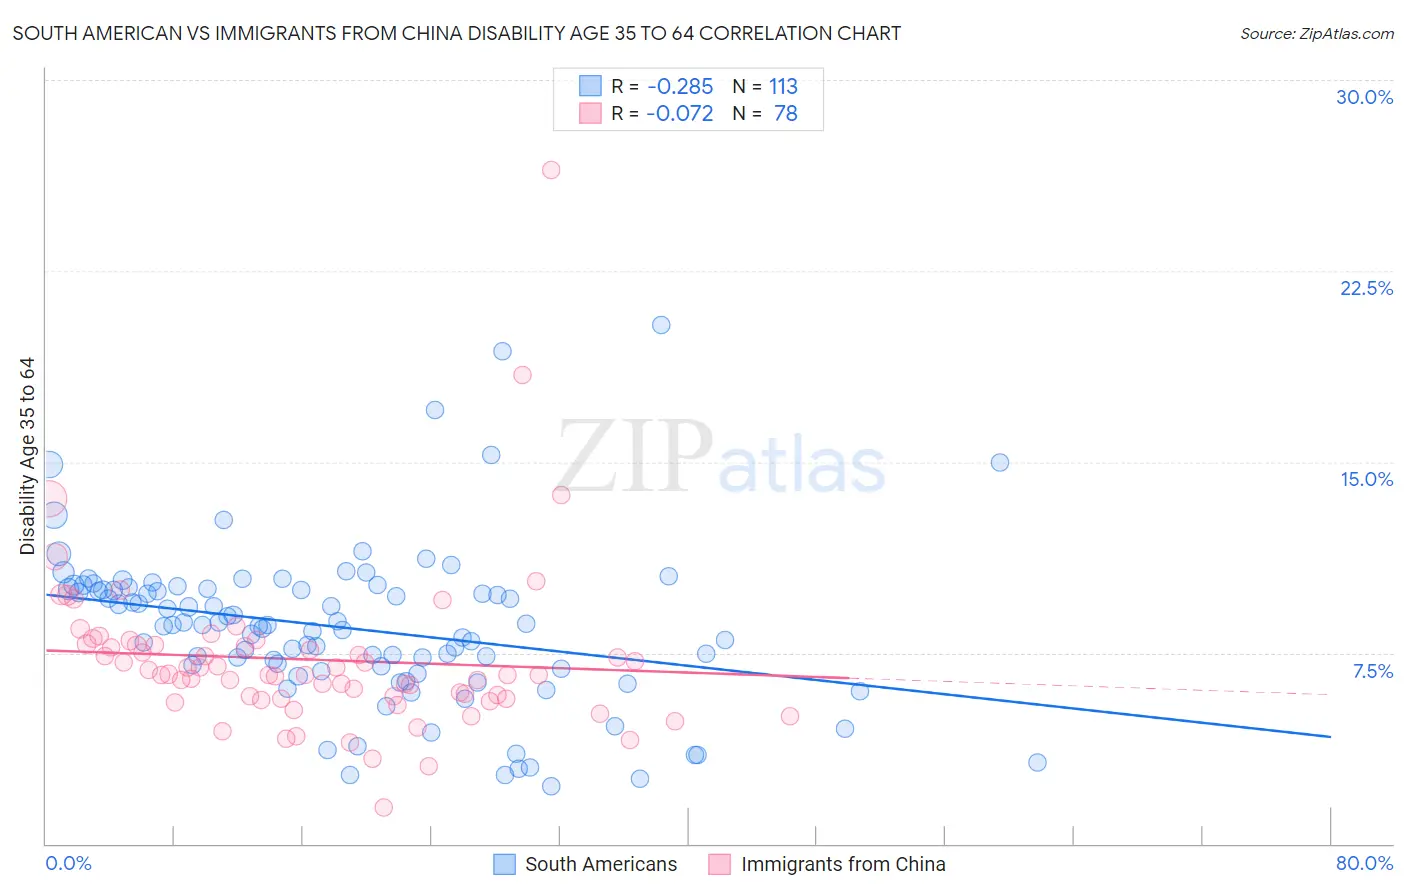 South American vs Immigrants from China Disability Age 35 to 64